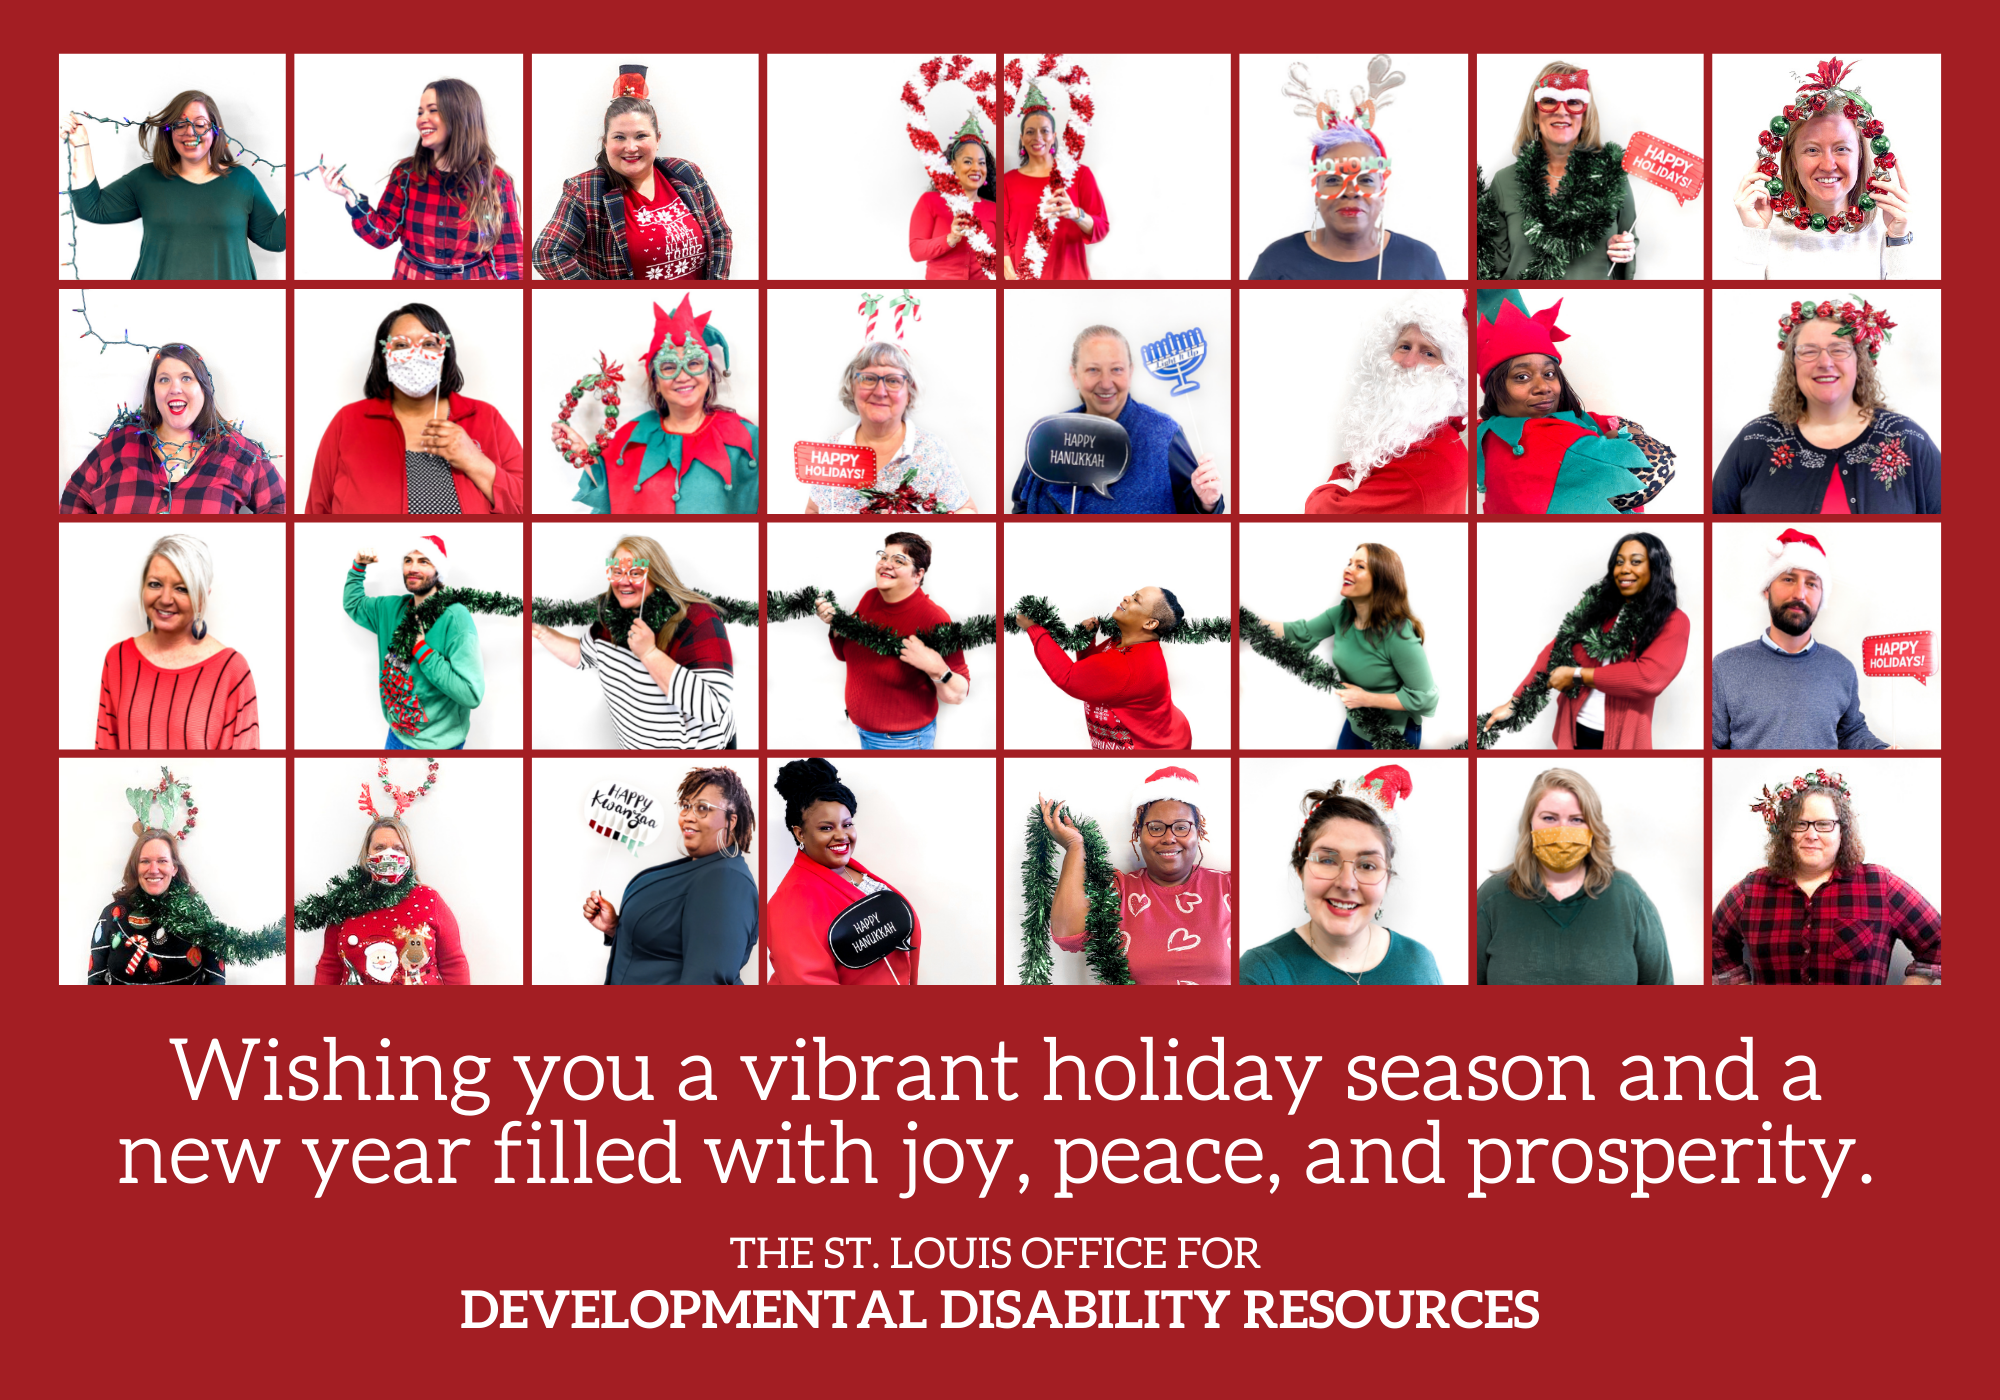 Collage of staff in holiday themed colors and probs.  Card reads, "Wishing you a vibrant holiday season and a new year filled with joy, peace, and prosperity. The St. Louis Office for Developmental Disability Resources."